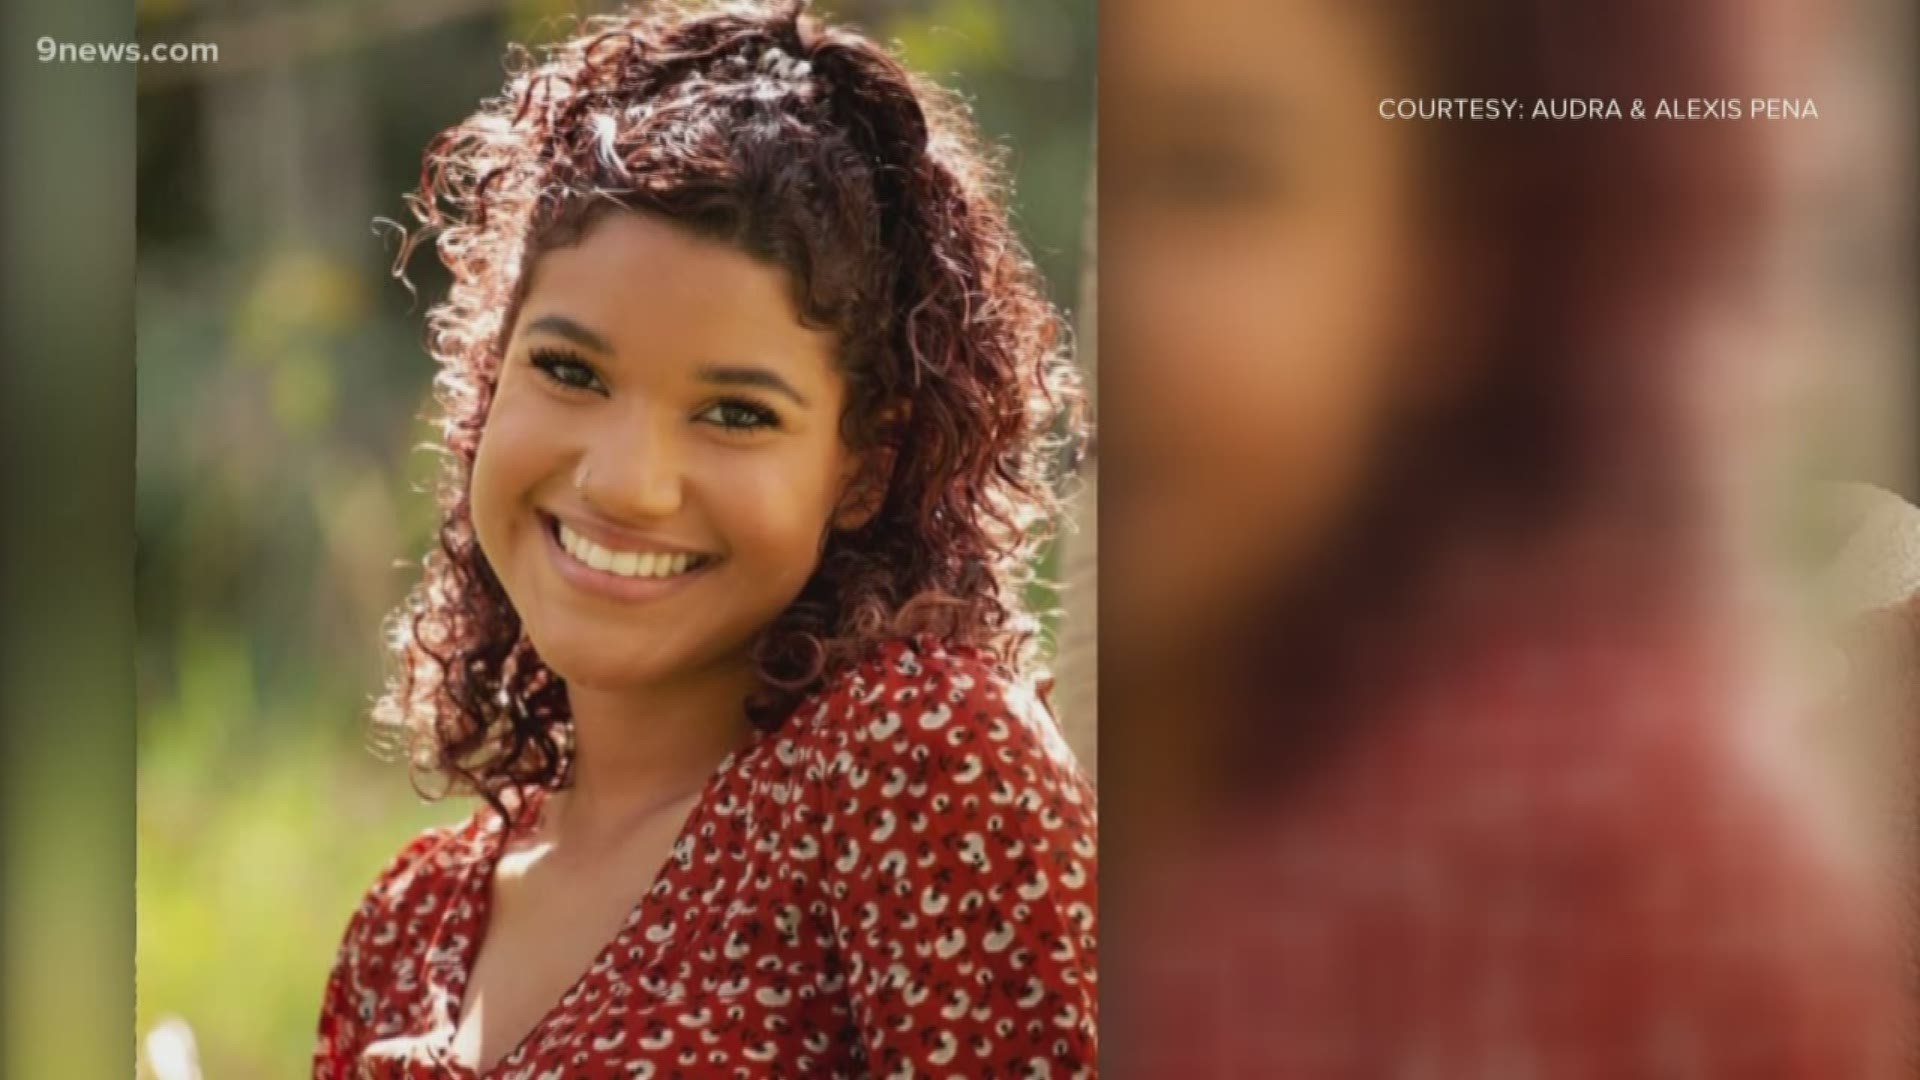 17-year-old Mya Pena was the victim in a suspected murder-suicide. her family members said they hope her story will save other lives in the future.